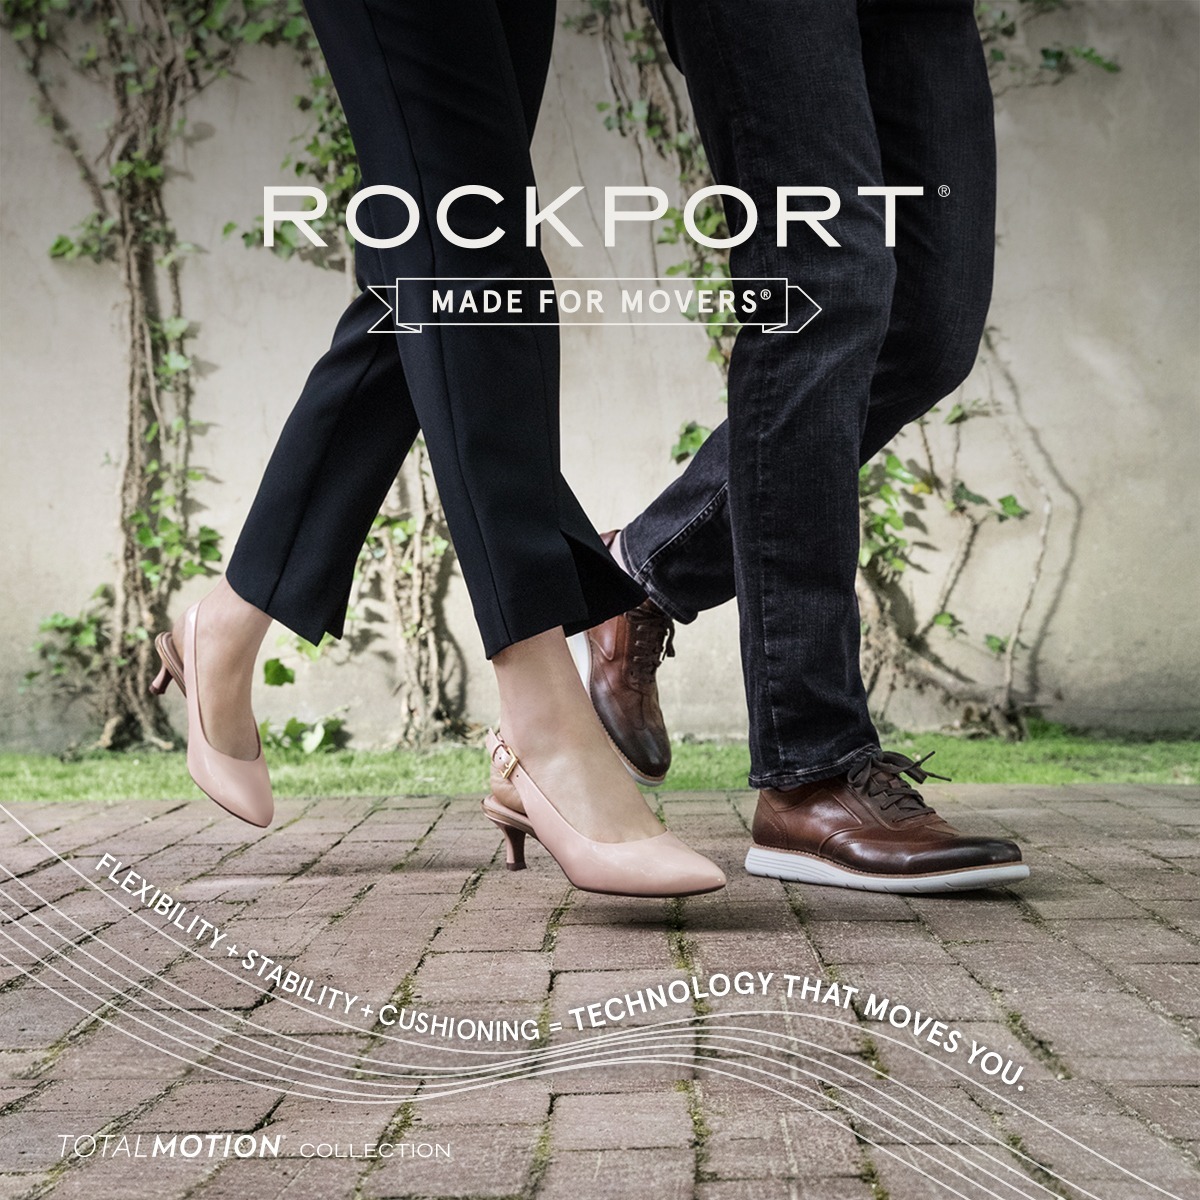 rockport made in